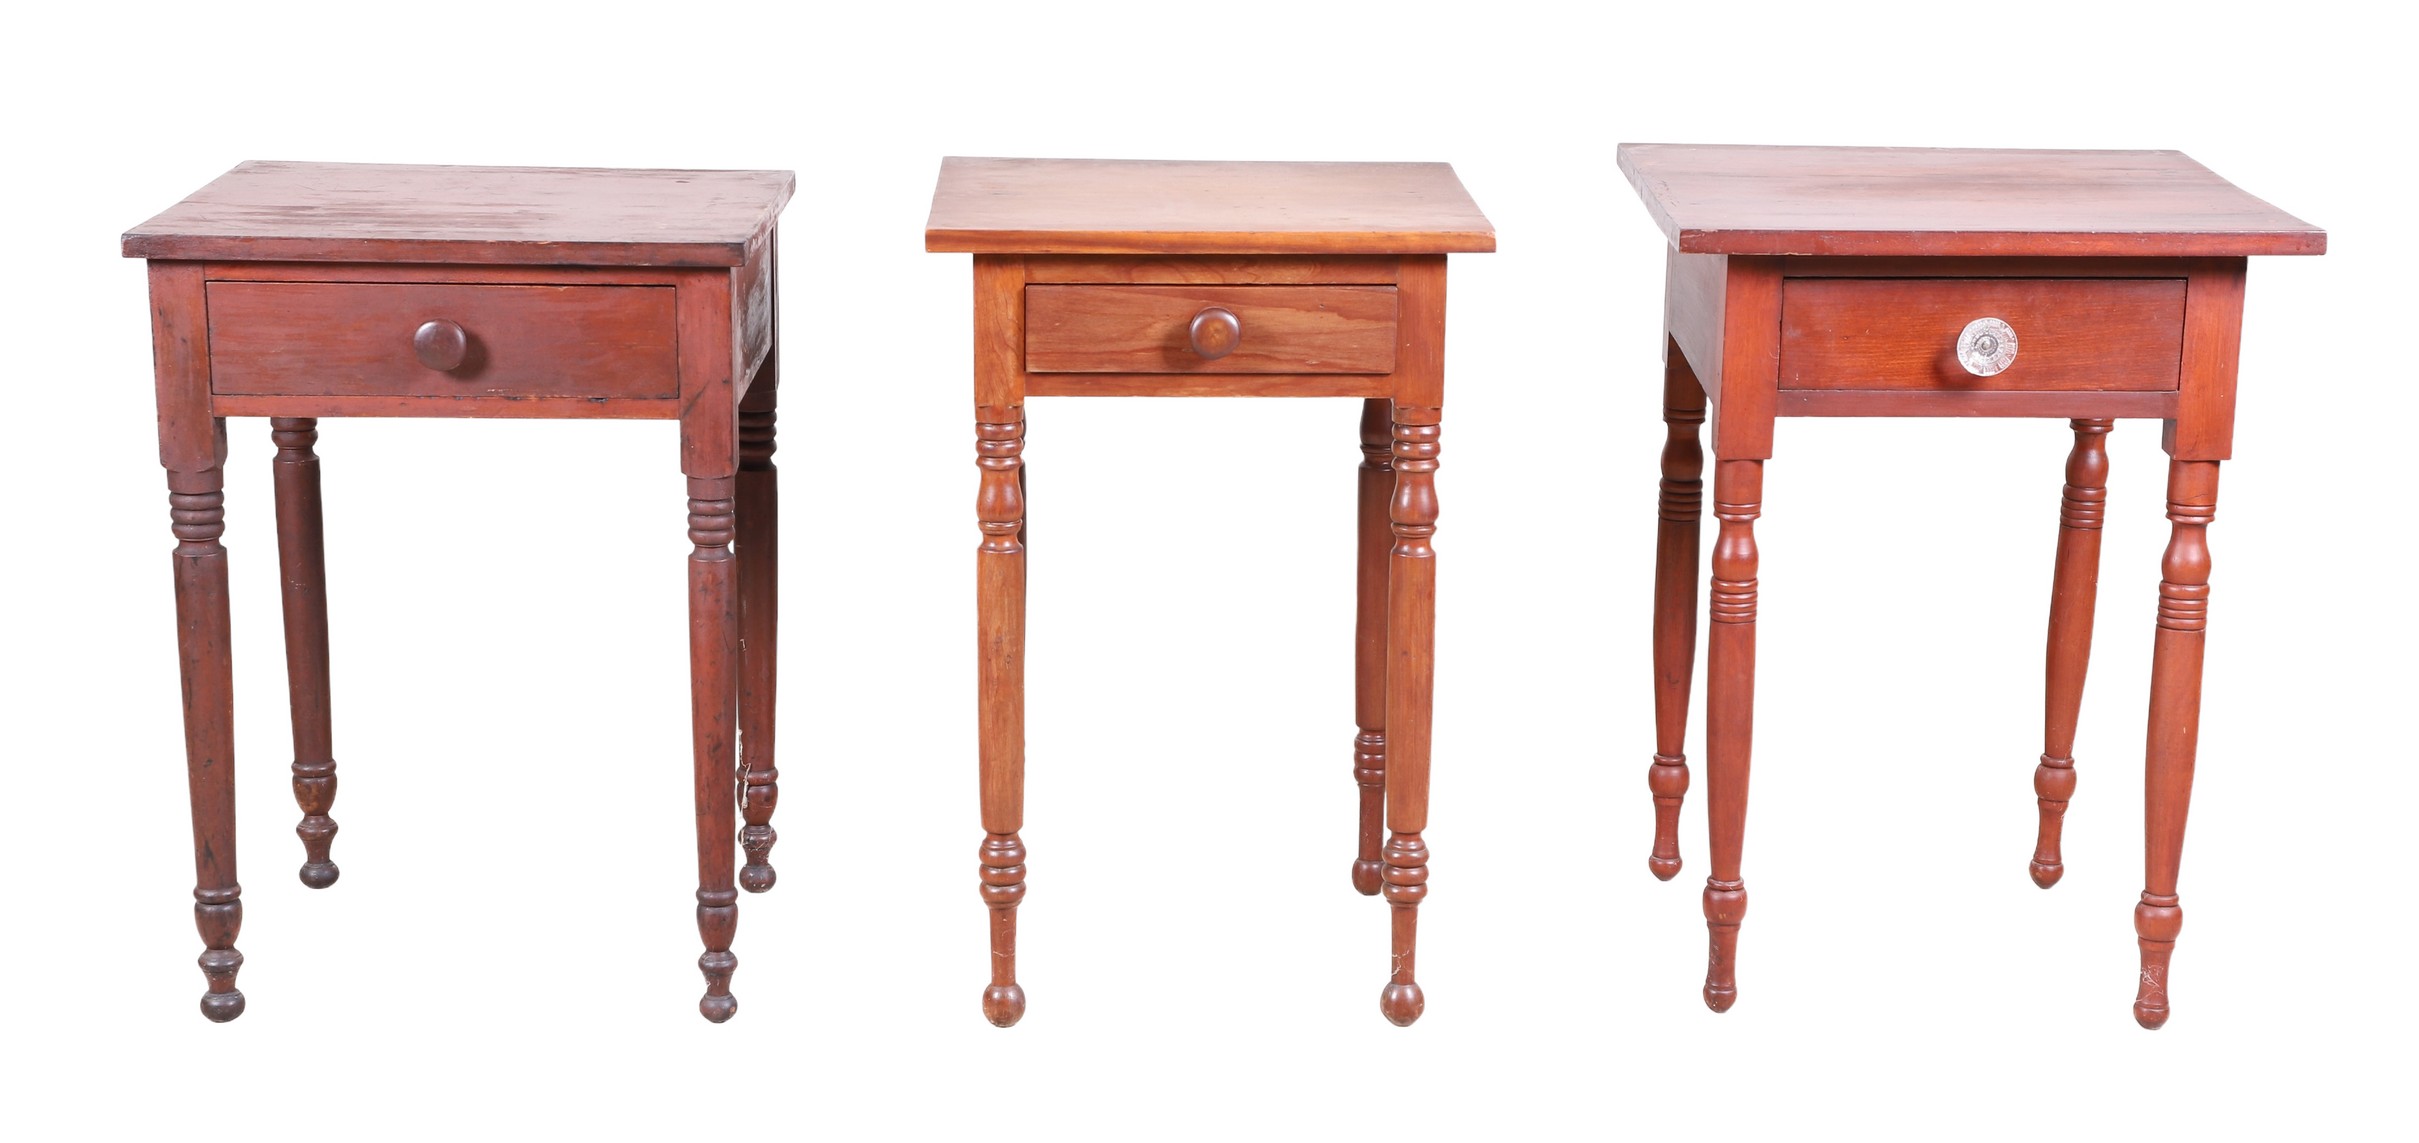  3 Cherry Sheraton 1 drawer stands  2e0d6f